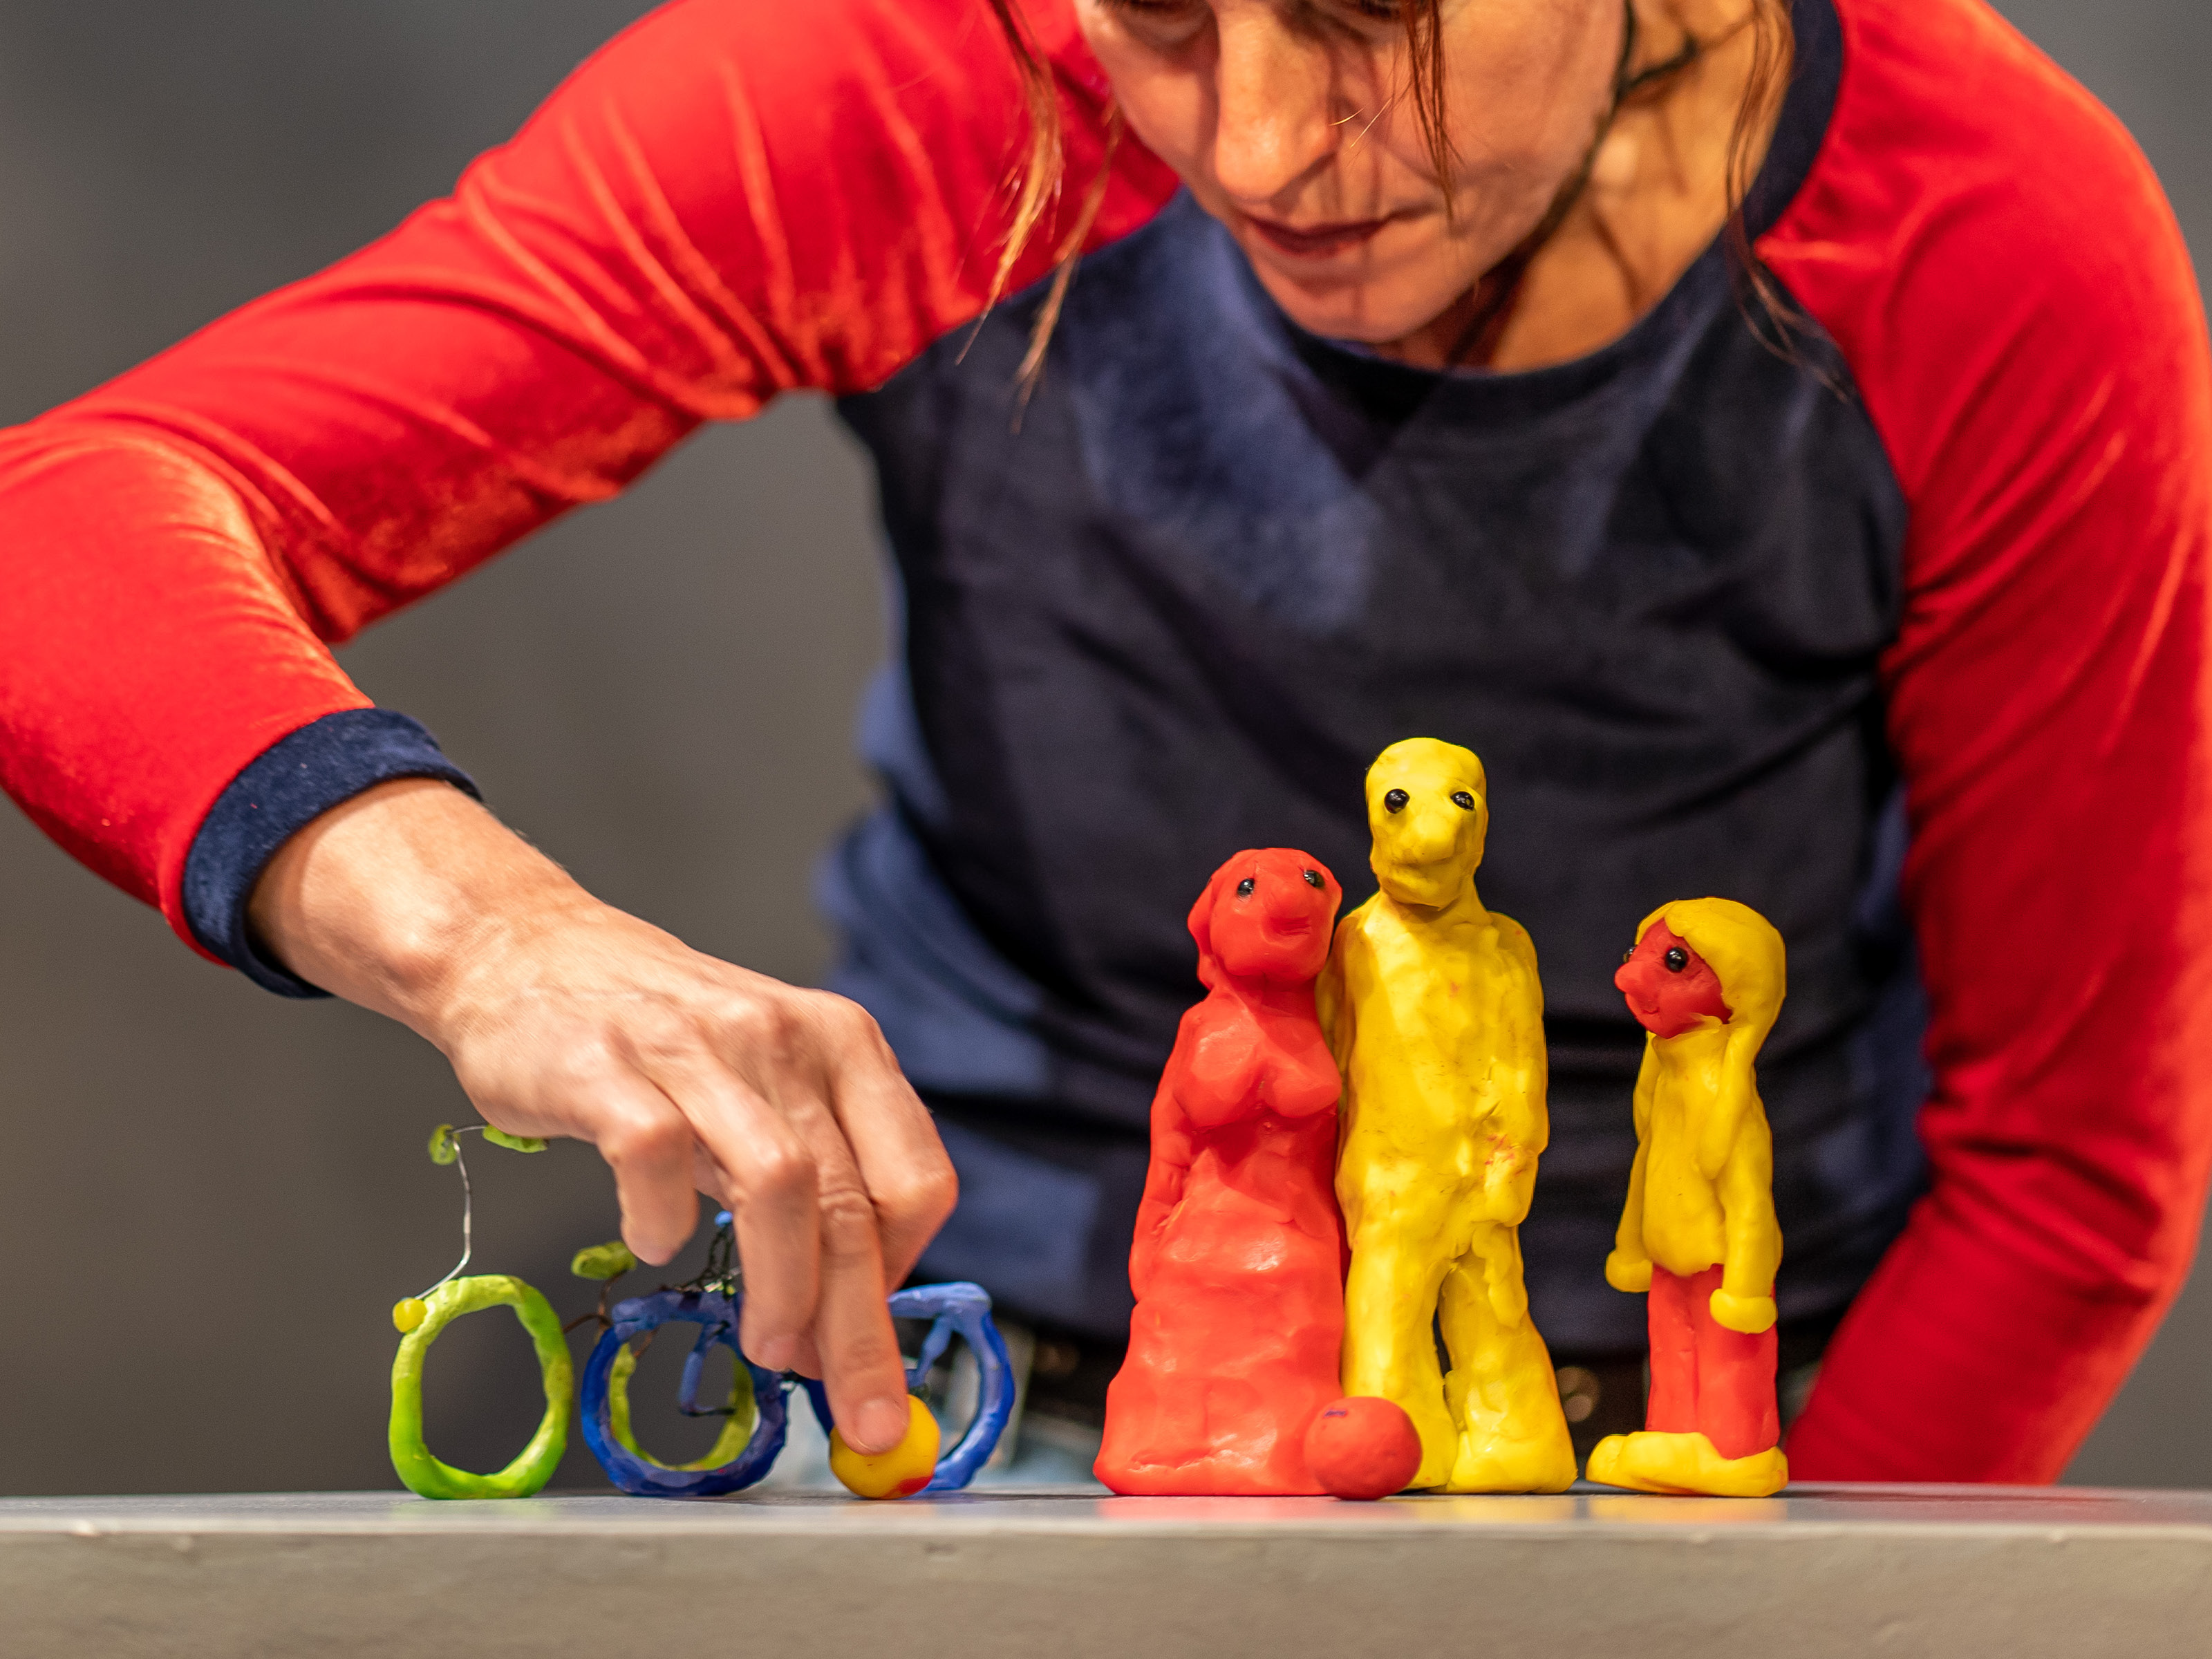 Puppeteer Annegret Geist holds a small bicycle made of plasticine with one hand. Next to the bicycle is a highly abstract three-headed family made of plasticine.